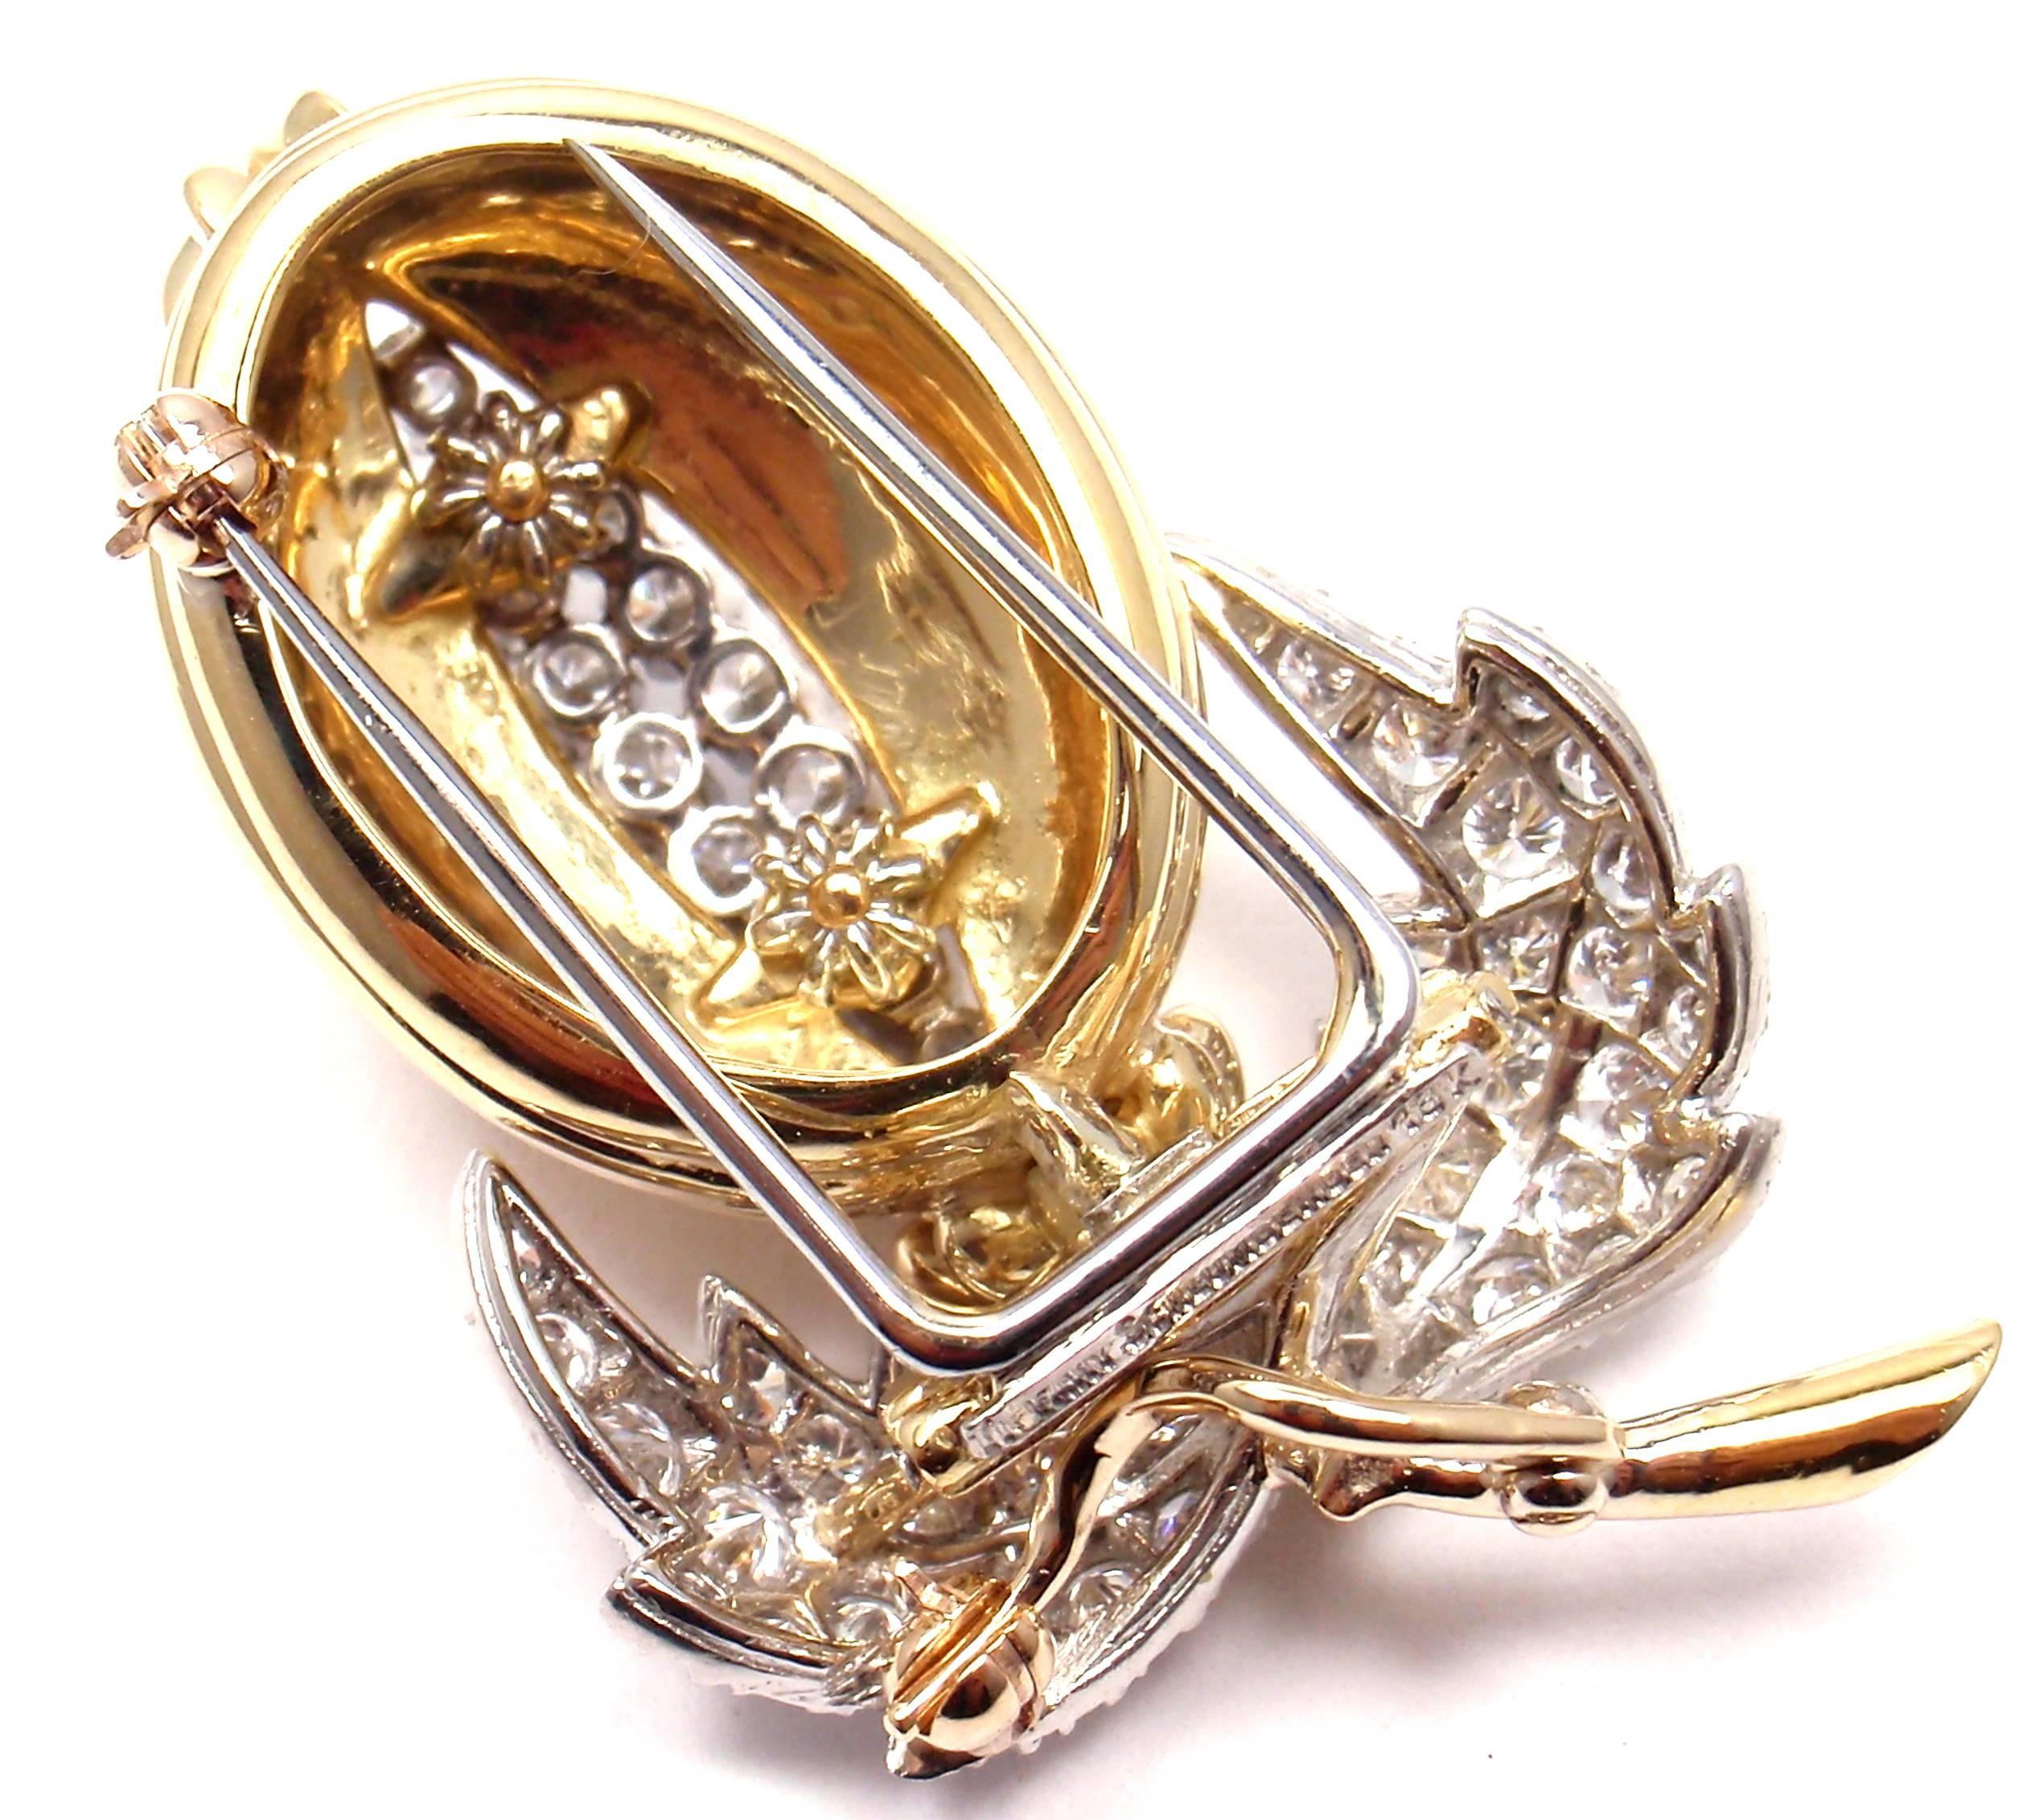 18k Yellow Gold and Platinum Diamond Acorn Pin Brooch by Jean Schlumberger for Tiffany & Co. 
This brooch comes with Tiffany & Co retail replacement valuation from July 9th, 2002 for $14,500
With 58 round brilliant cut diamonds VVS1 clarity, F